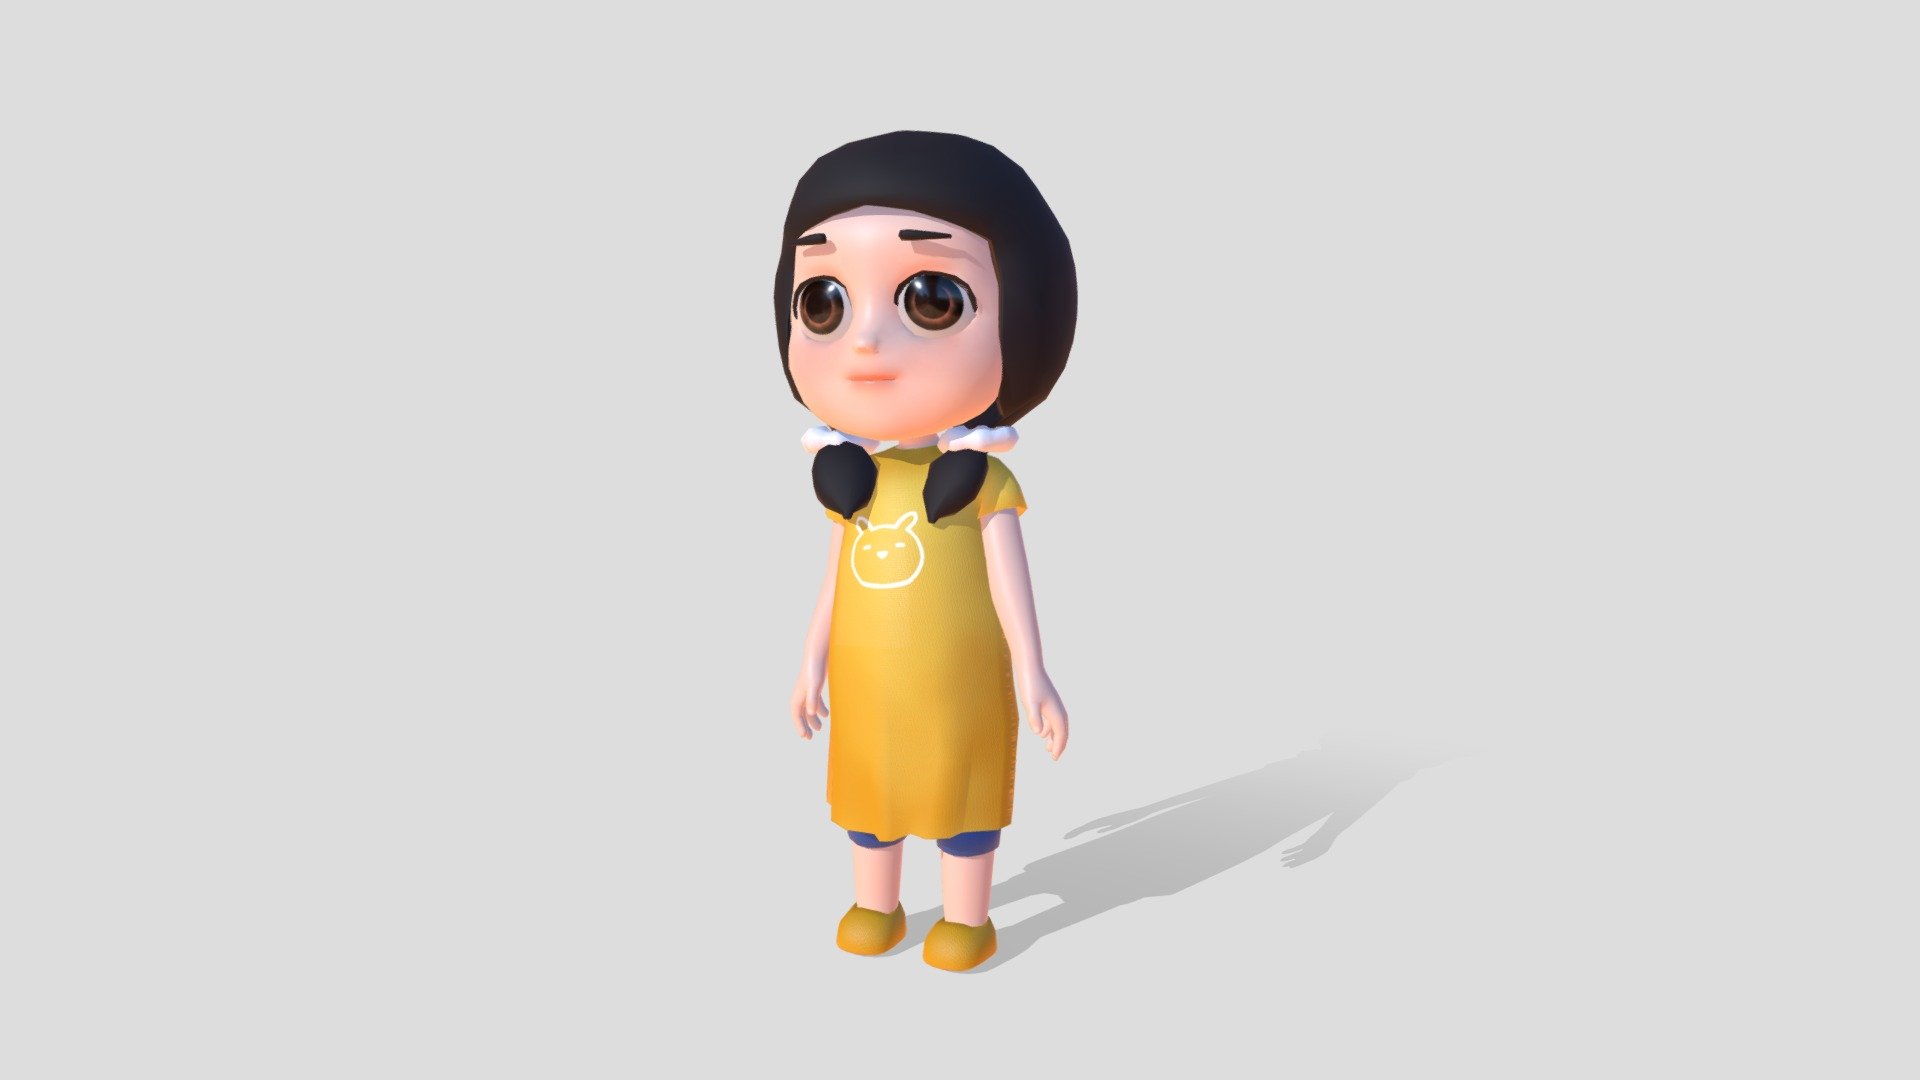 Stylised girl character in casual everyday wear.
Animations included: Walking (Loop), Running (Loop), Waving (Loop), Idle (Loop), Talking (Loop)

Login to STB’s Tourism Information &amp; Services Hub for free downloads:
https://tih.stb.gov.sg/content/tih/en/marketing-and-media-assets/digital-images-andvideoslisting/digital-images-and-videos-detail.104e0f89d3df06645e495c20c9e2b95ea59.Female+Child+4.html - Female Child 4 - 3D model by STB-TC 3d model